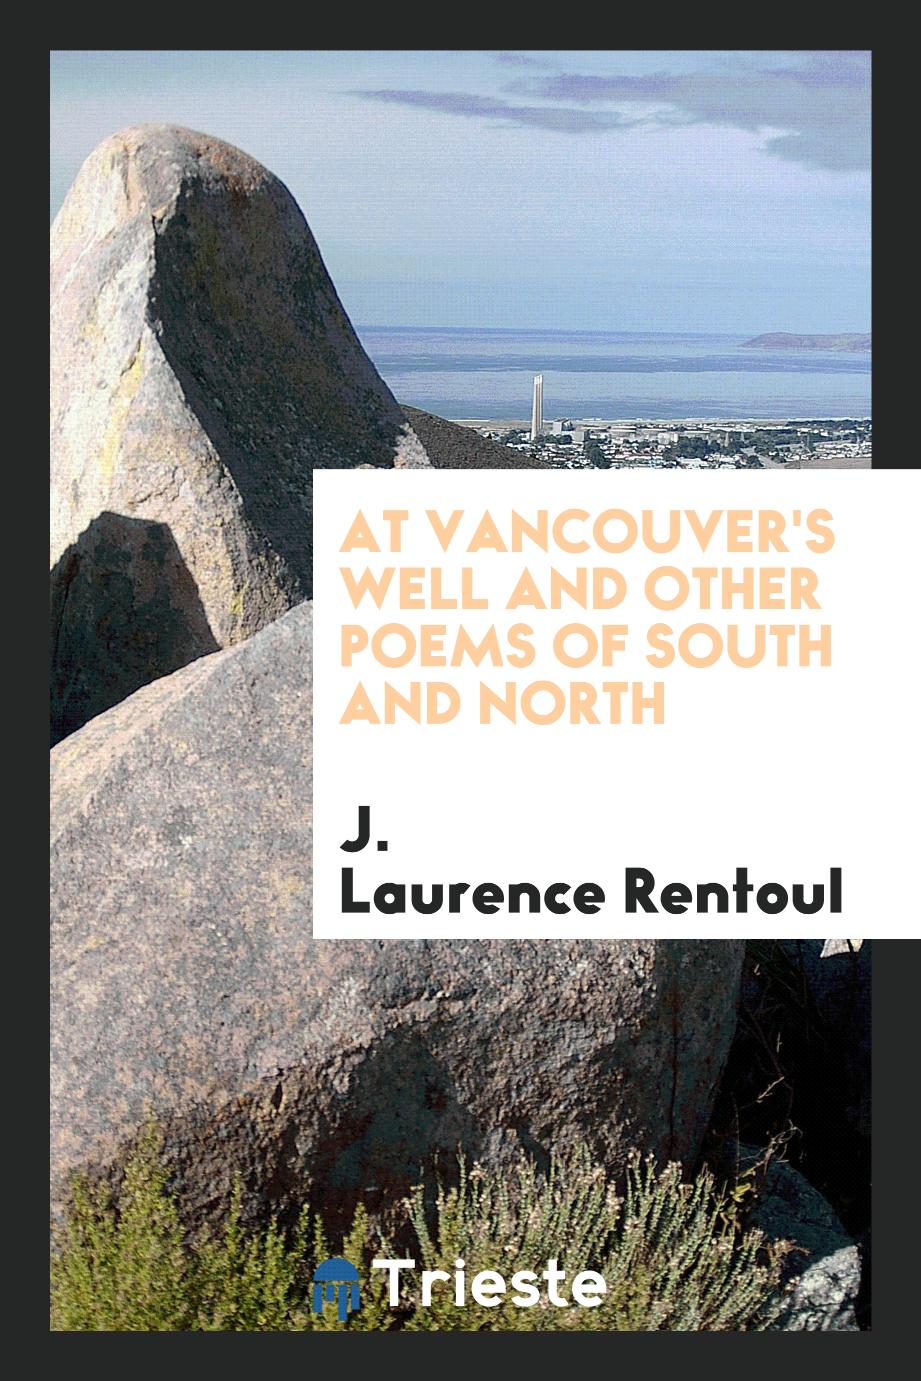 At Vancouver's well and other poems of South and North